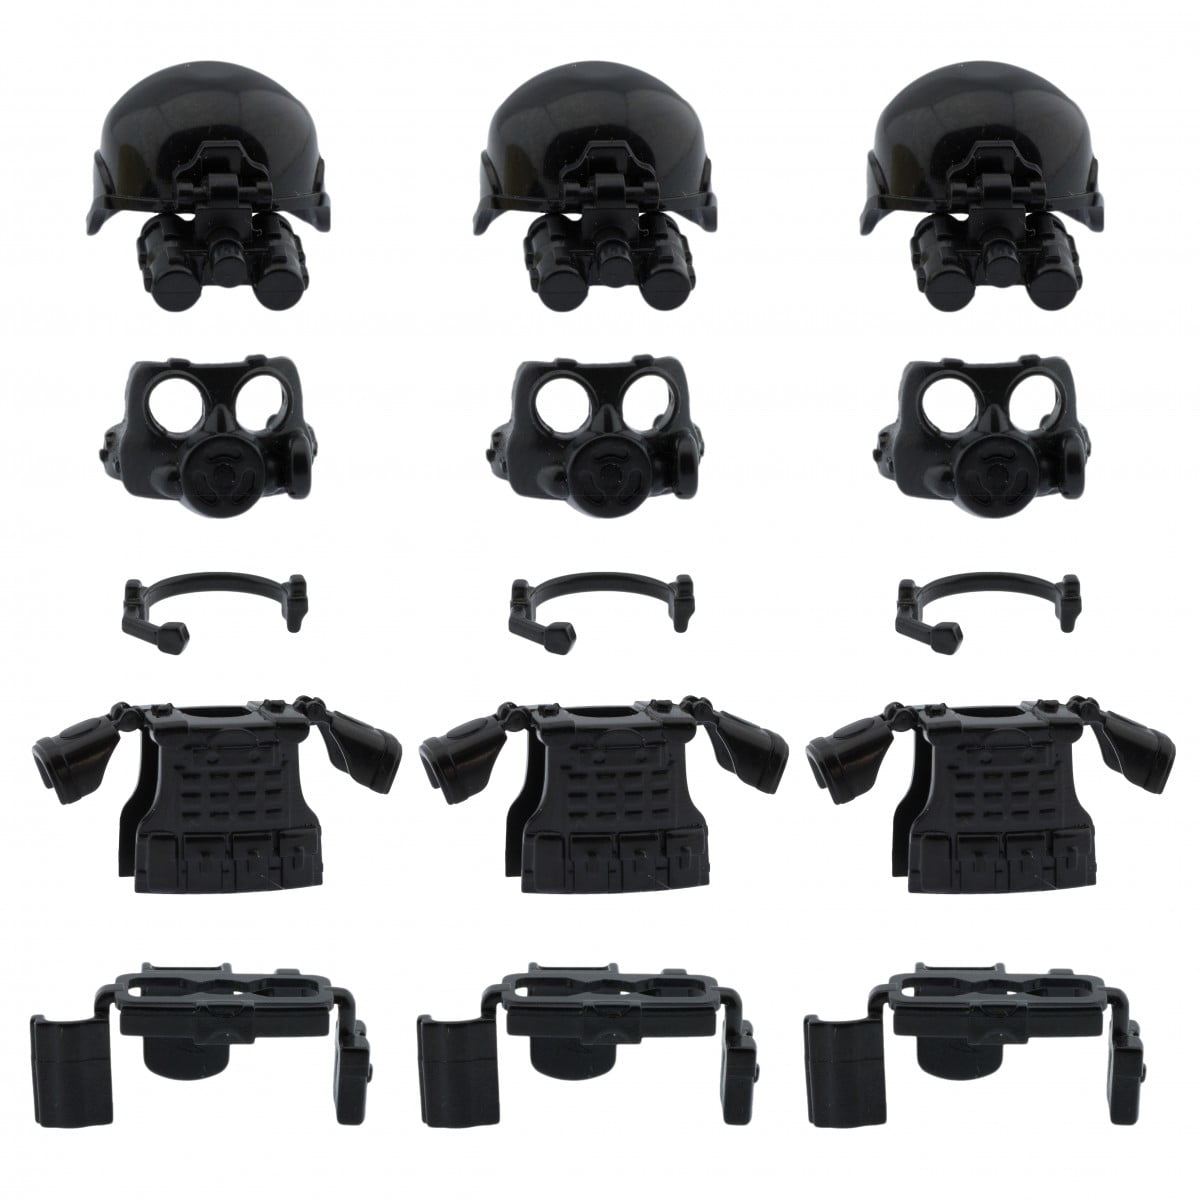 Tank Green Q5 W129 Tactial Vest compatible with toy brick minifigures SWAT 